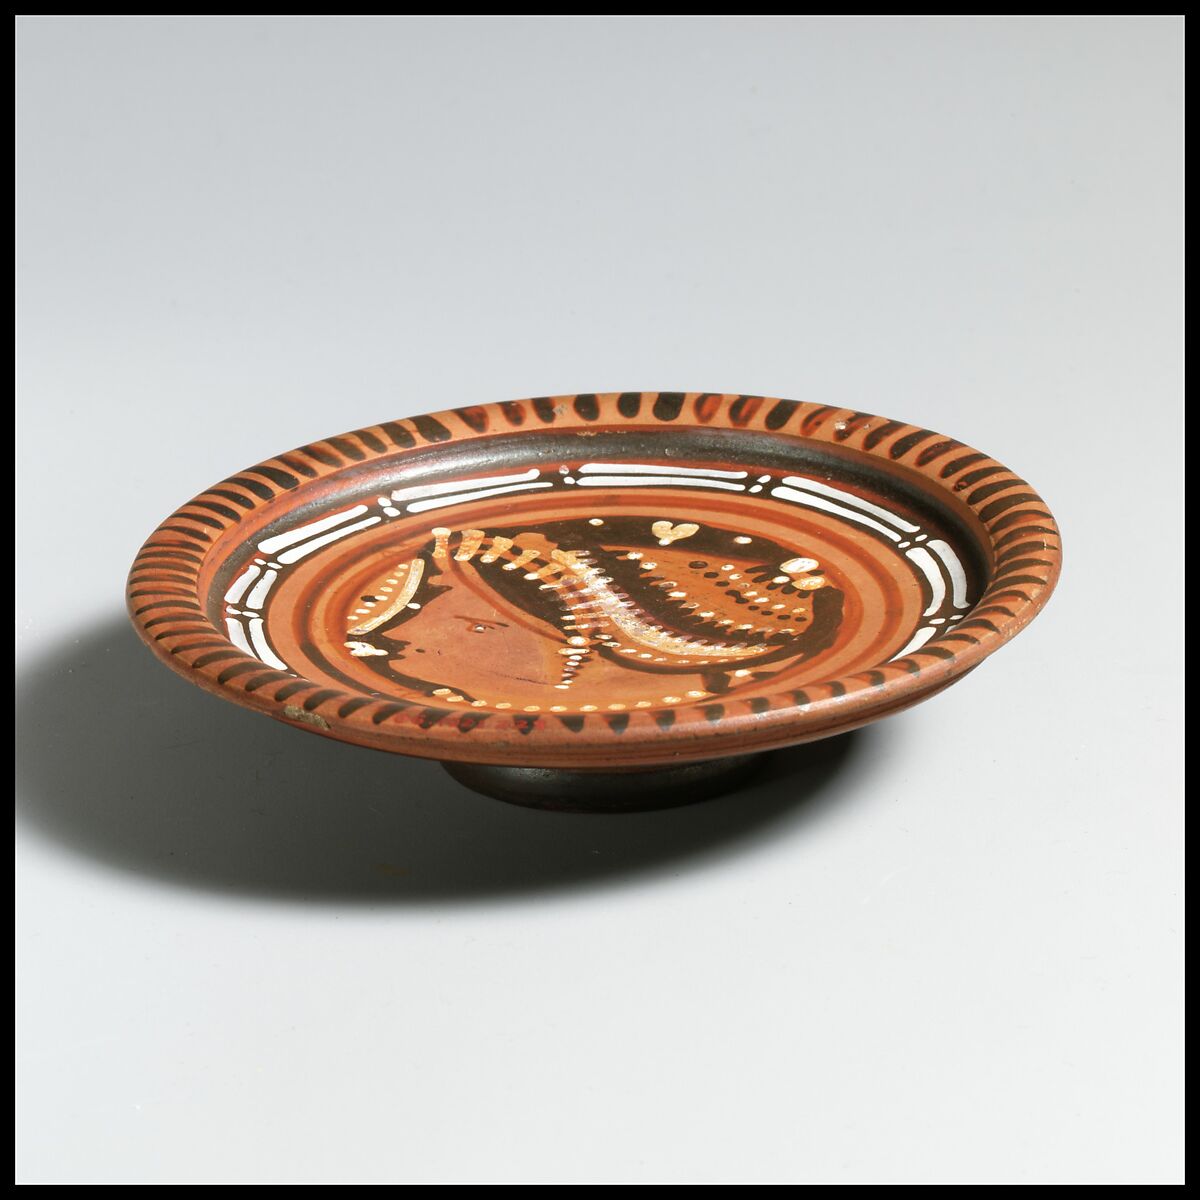 Terracotta plate, Attributed to the Kantharos Group, Terracotta, Greek, South Italian, Apulian 